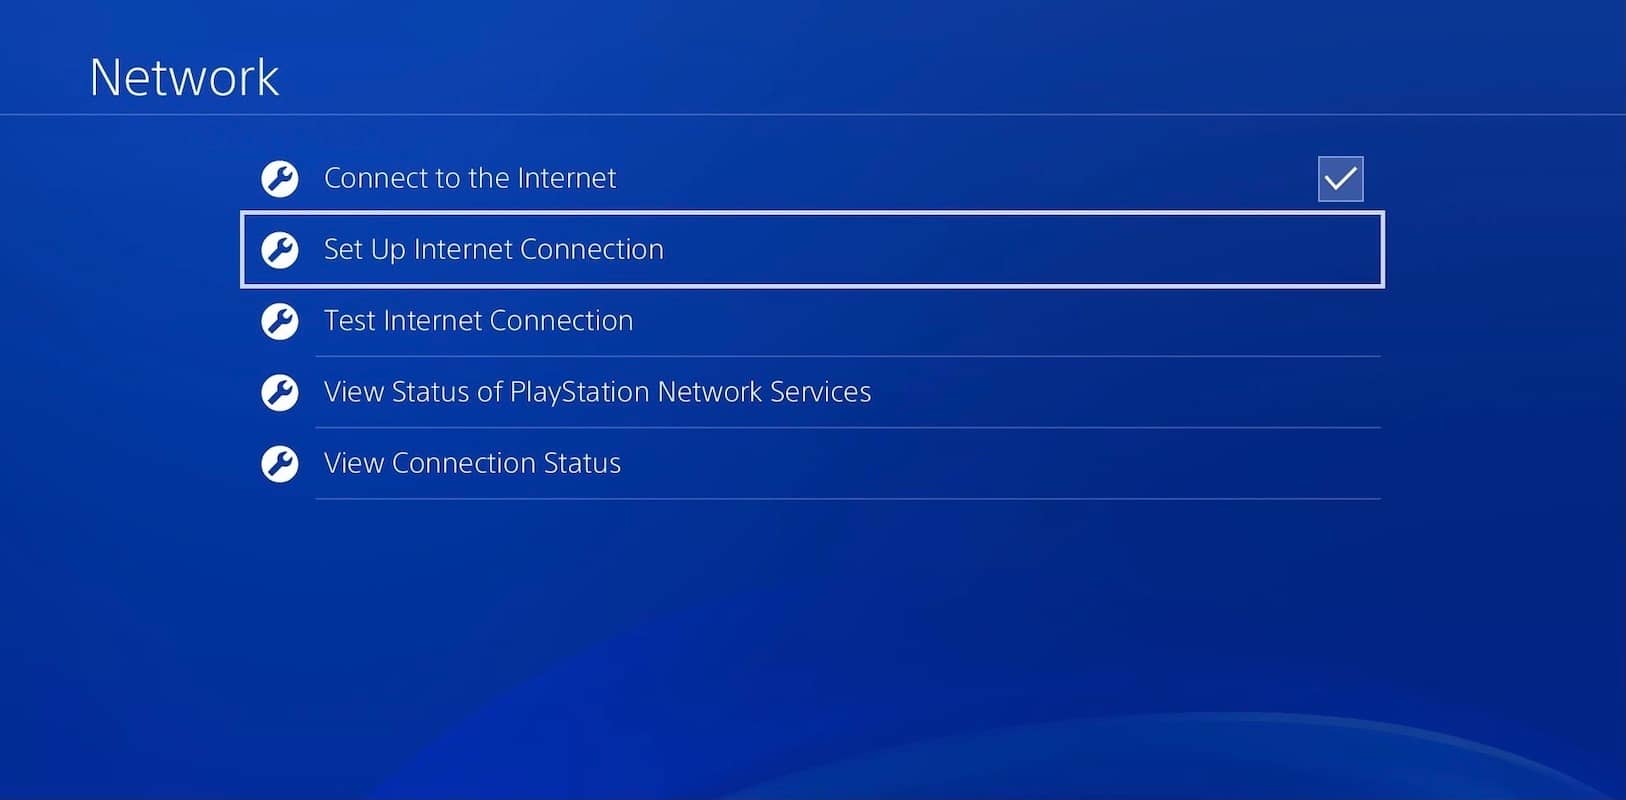 How to Use a VPN on a PS4 to Unblock Geographically Restricted Content?